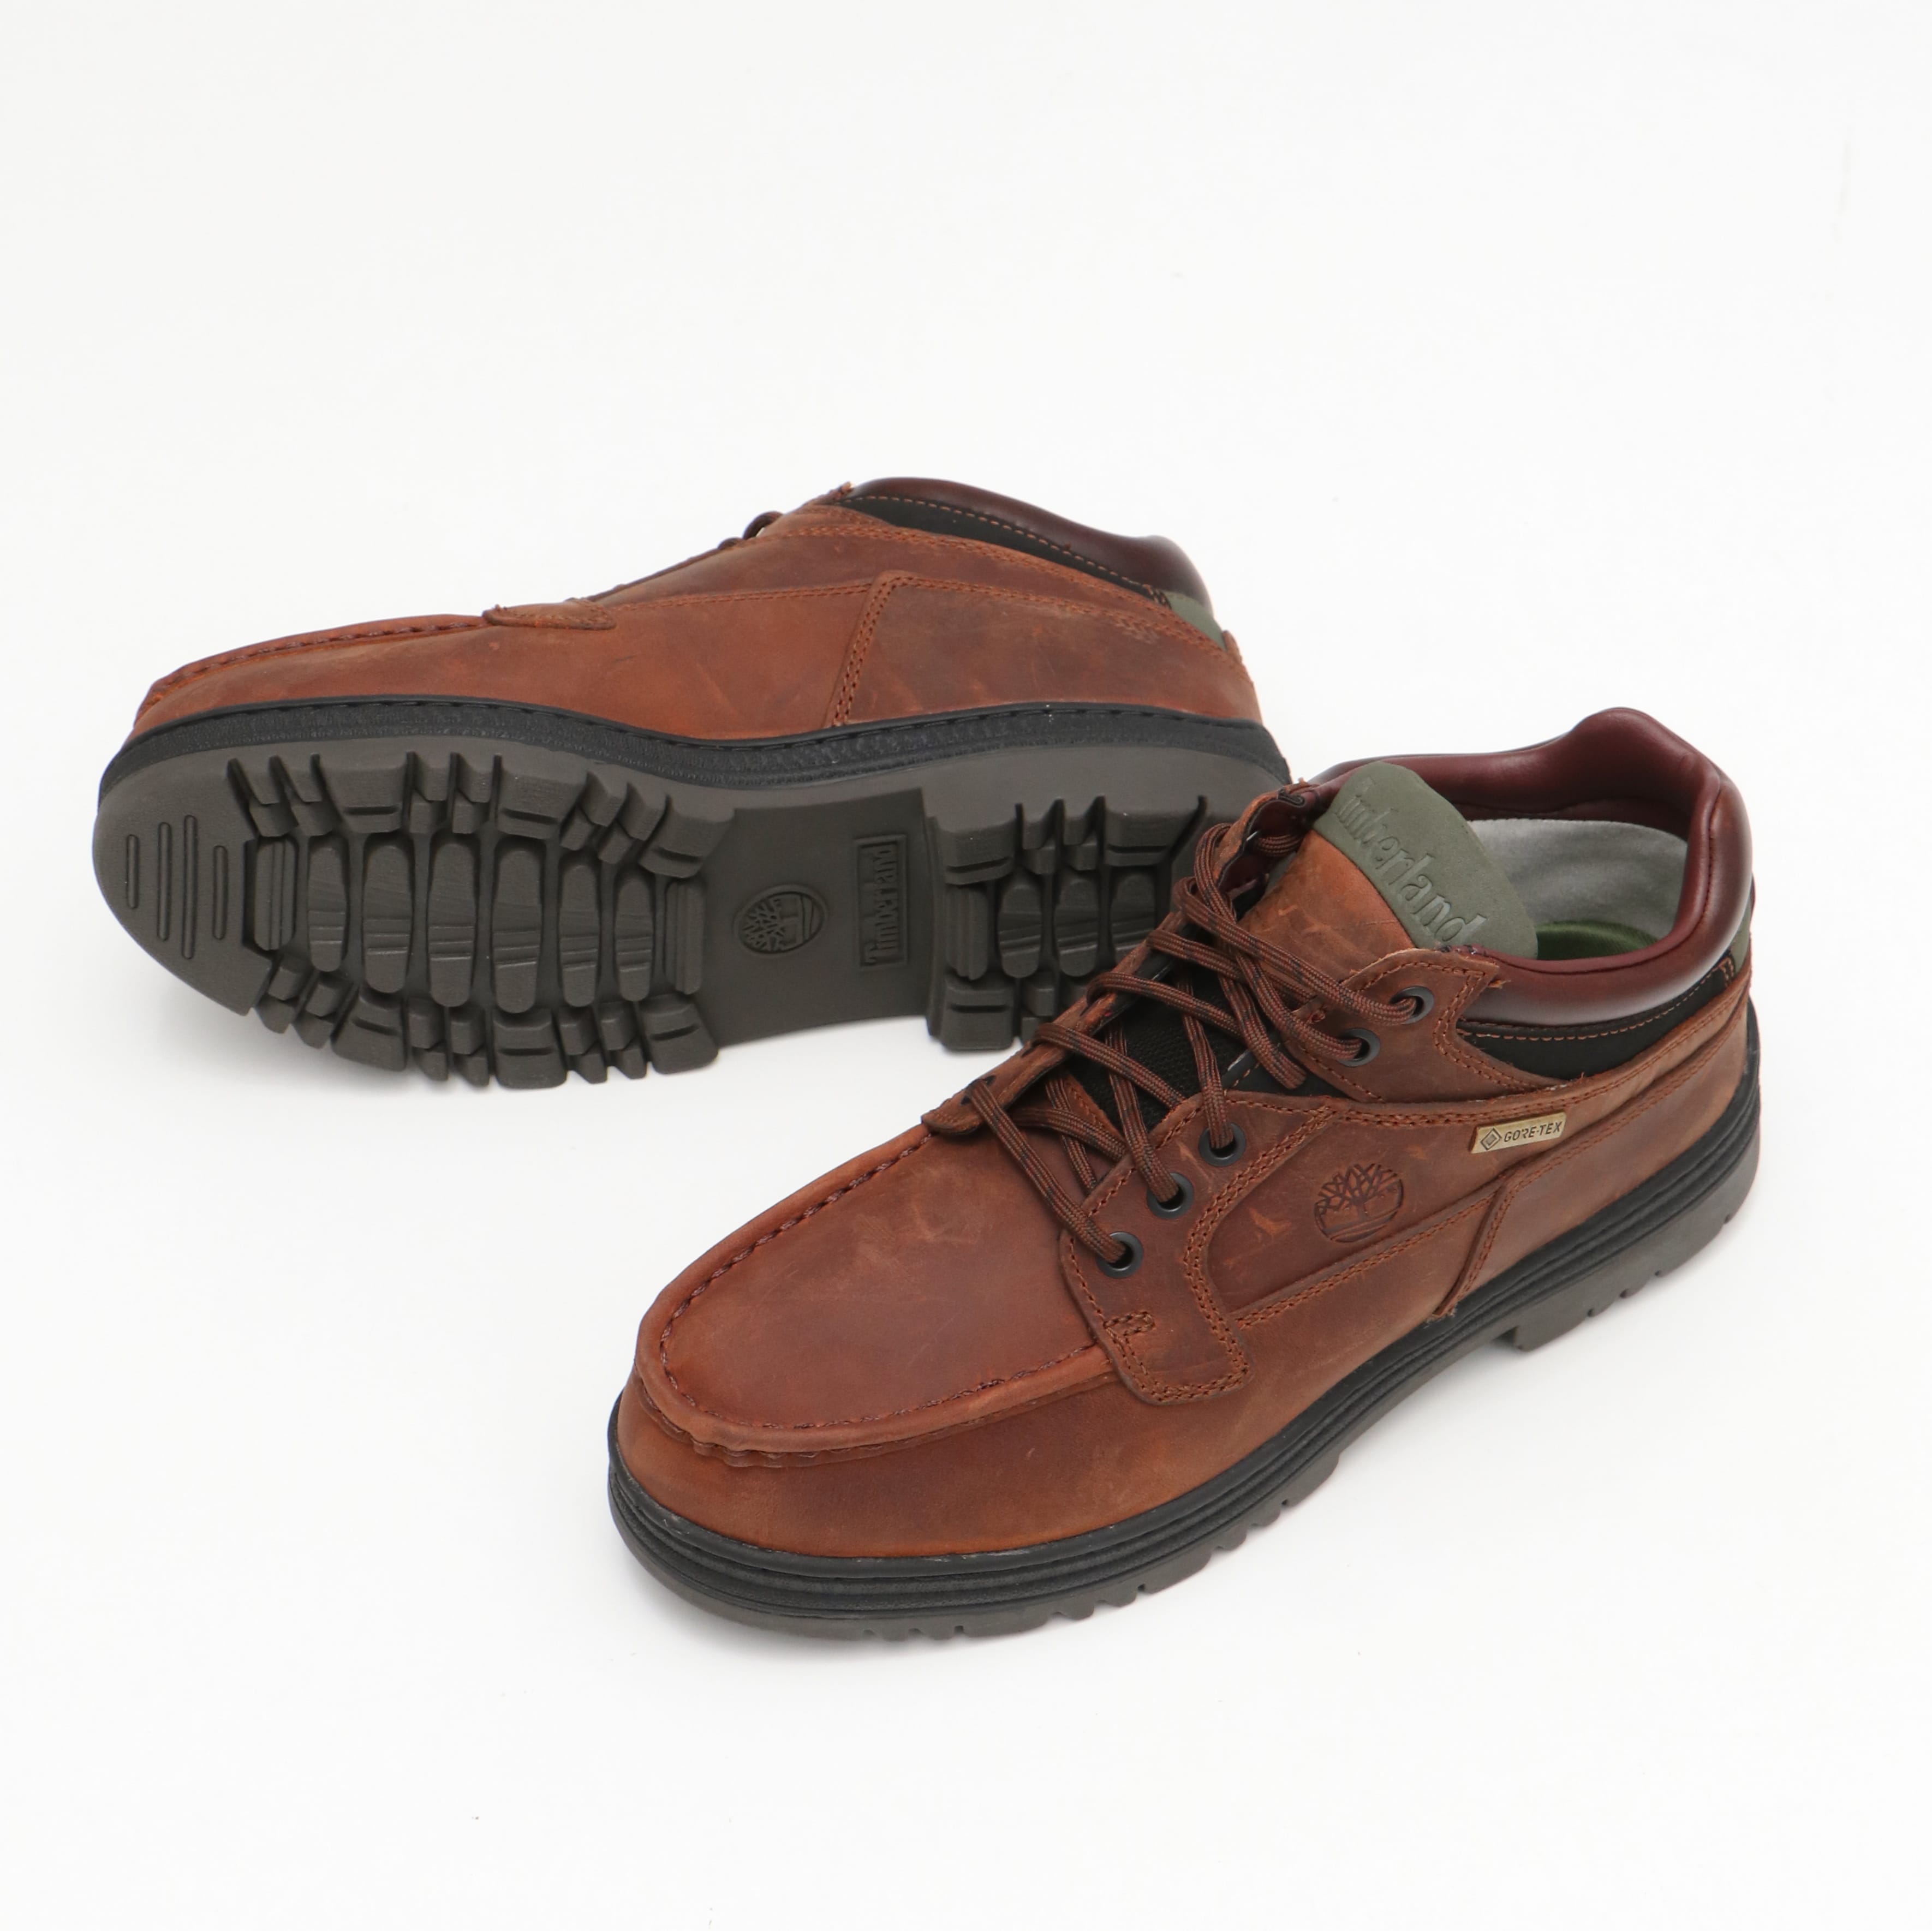 HERITAGE GTX MOC TOE MID – TIME AFTER TIME